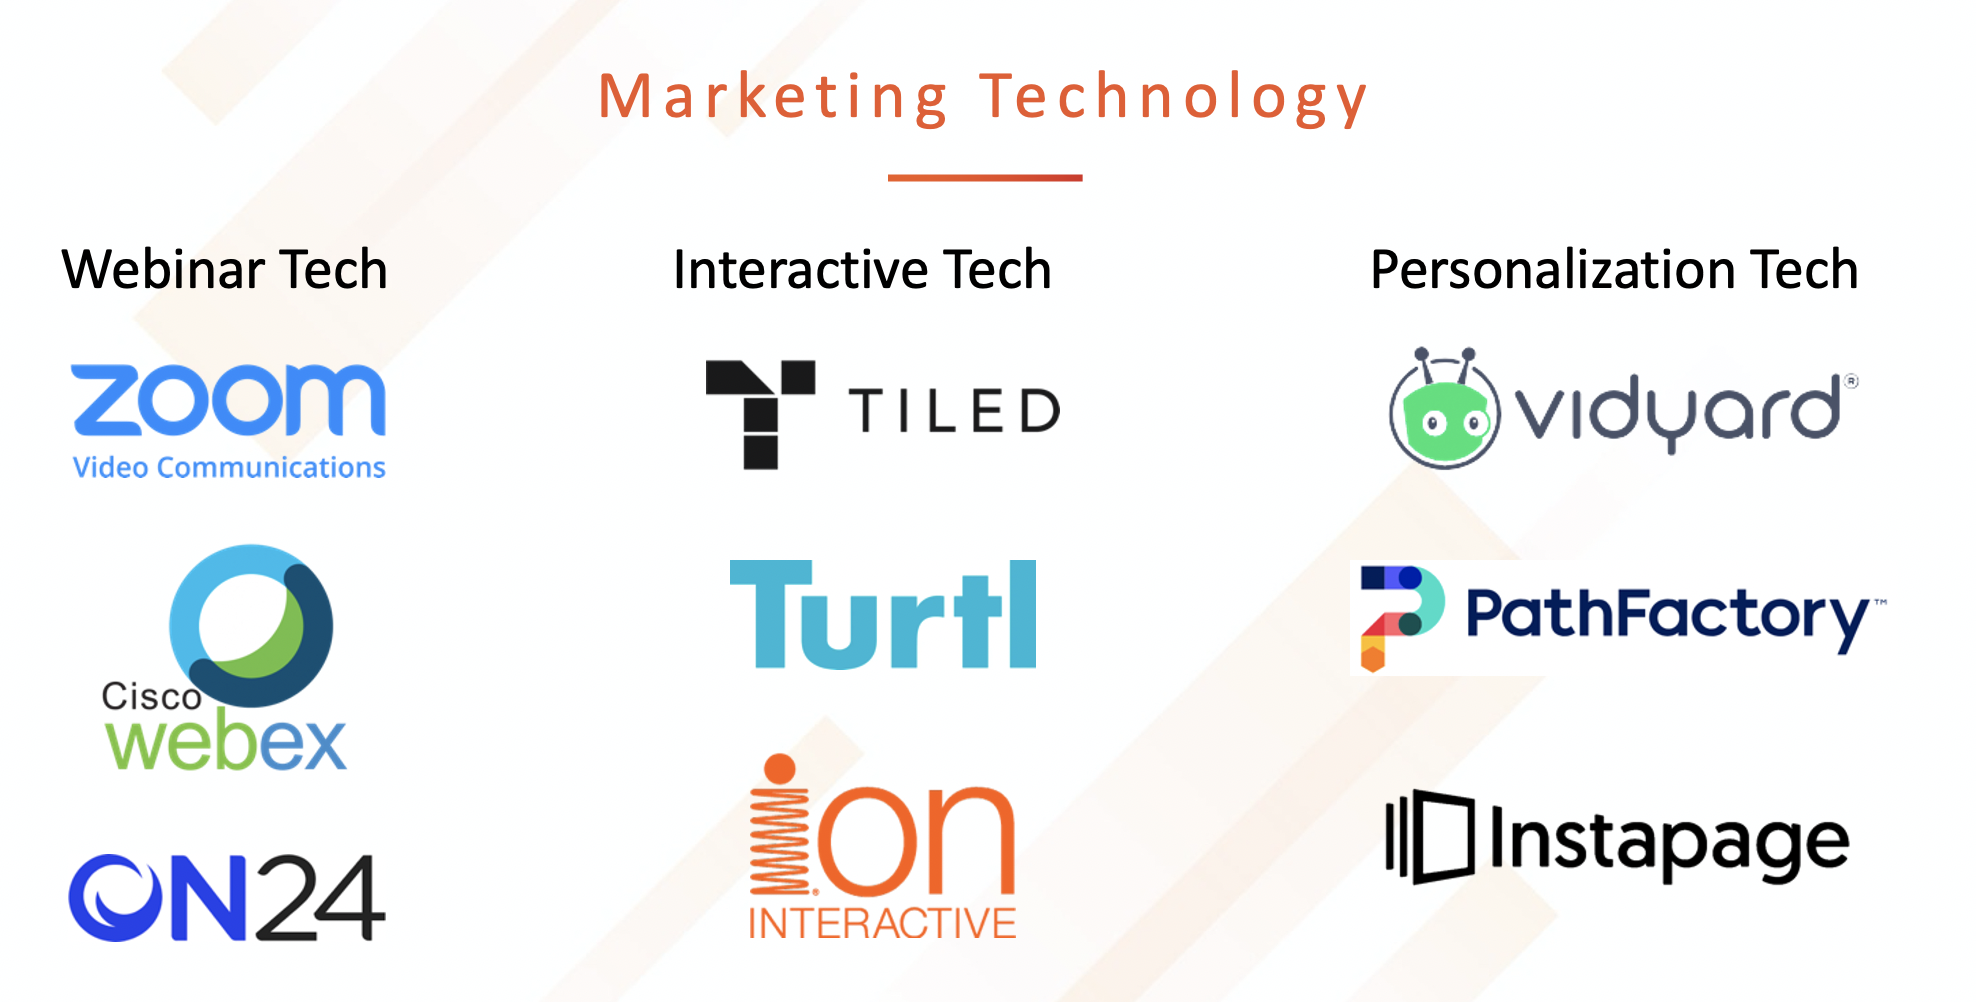 Examples of Marketing Technology